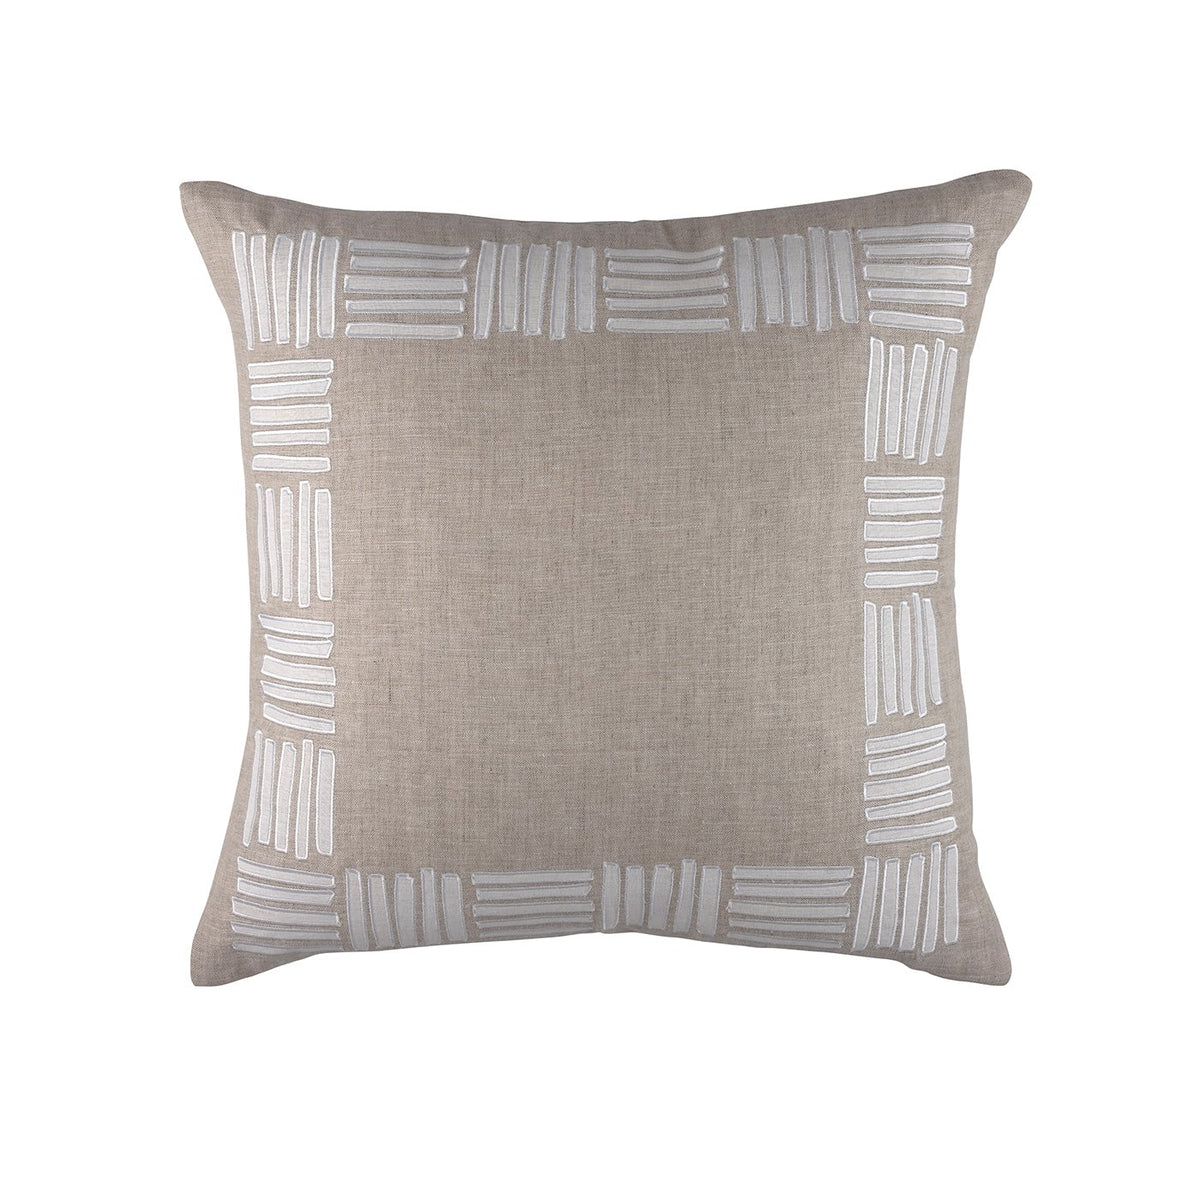 Aspen Natural &amp; White Euro Pillow by Lili Alessandra | Fig Linens